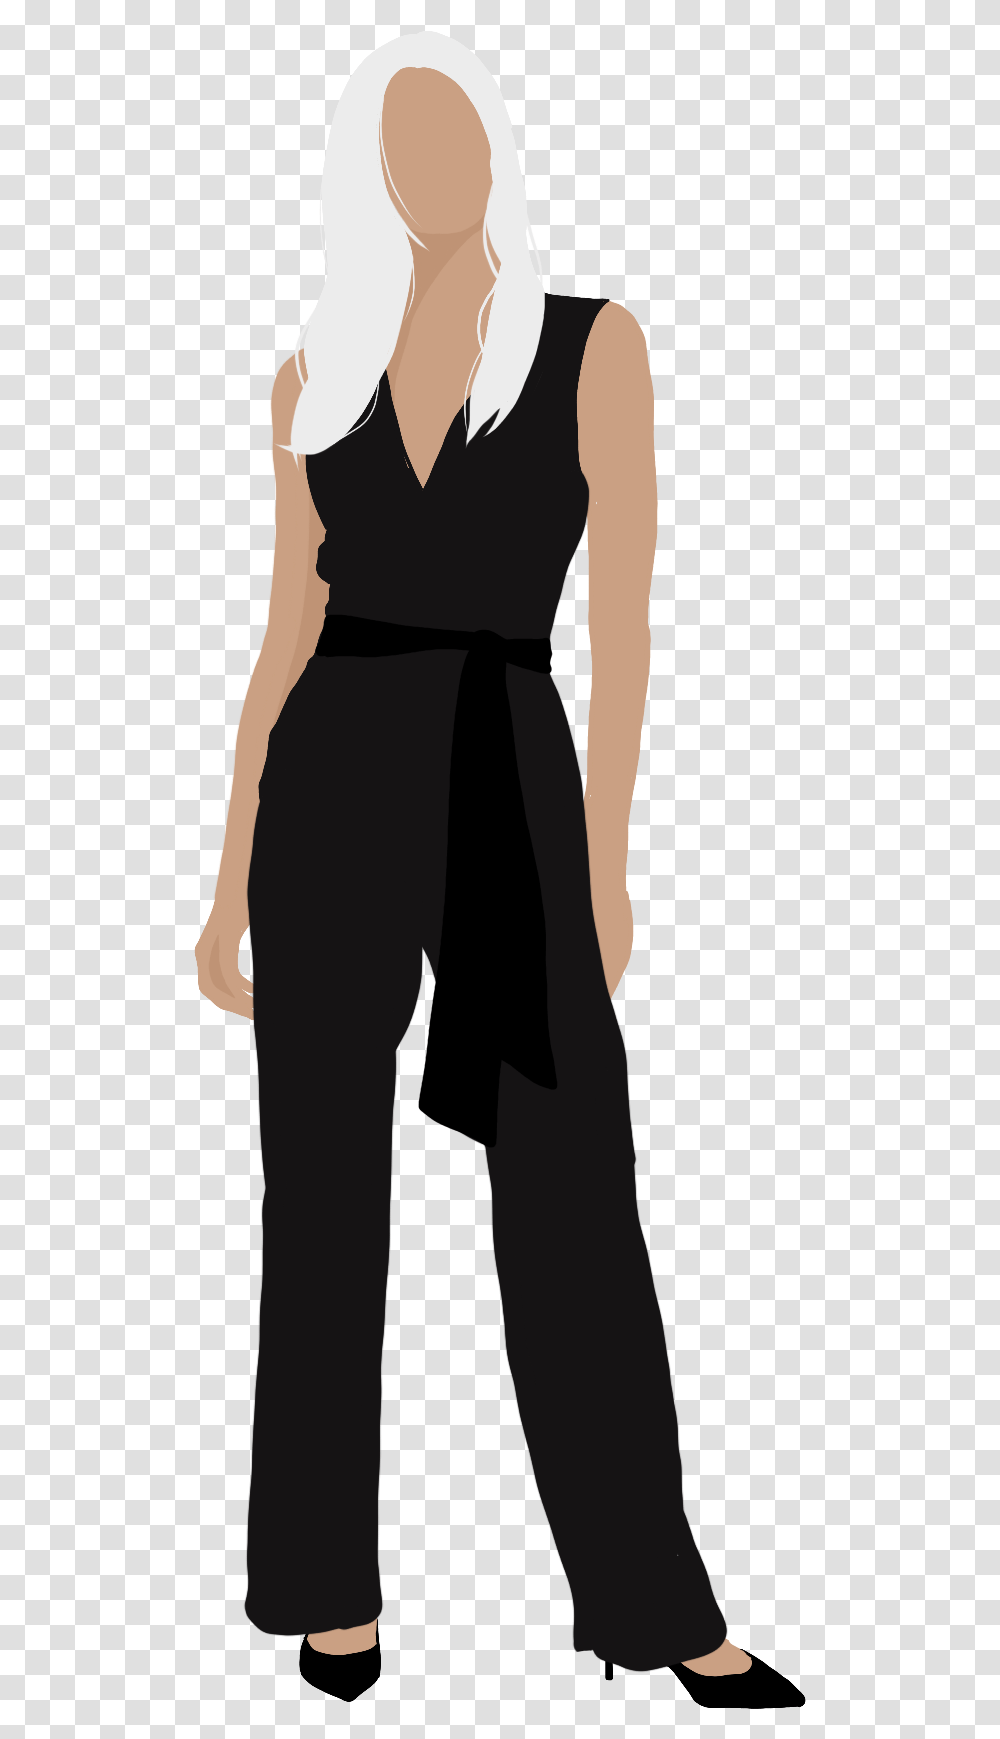 Behance Vector Illustration People Human Vector Graphics, Clothing, Person, Sleeve, Dress Transparent Png